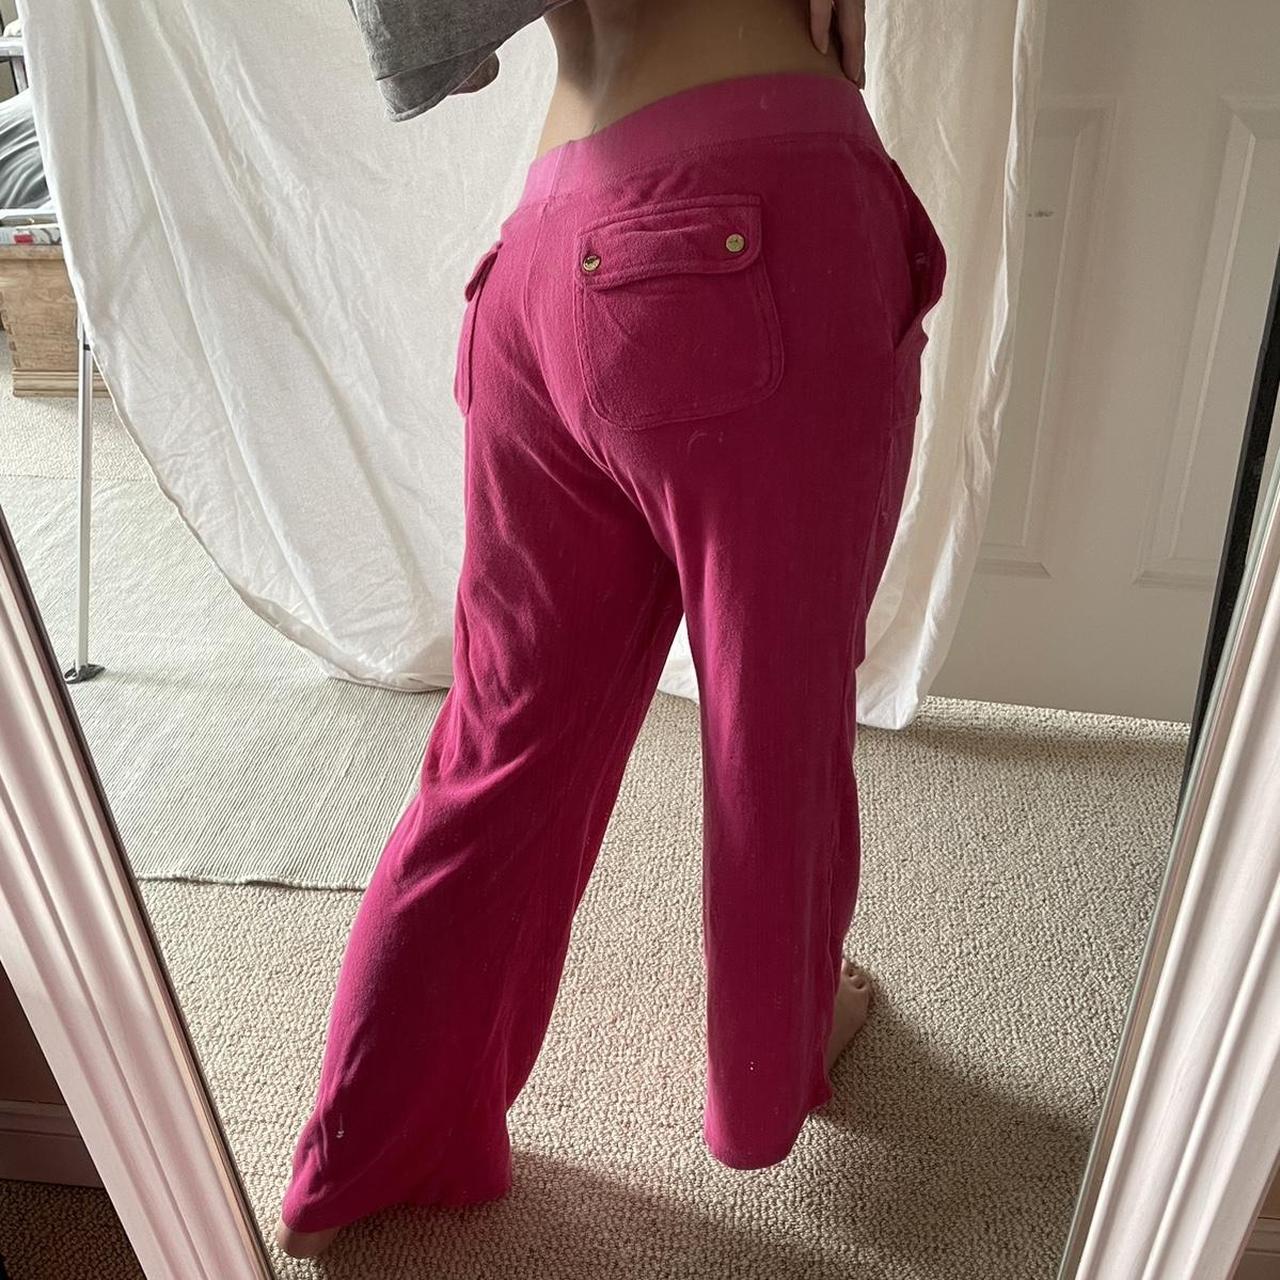 Y2K velour juicy couture hot pink pants with JUICY